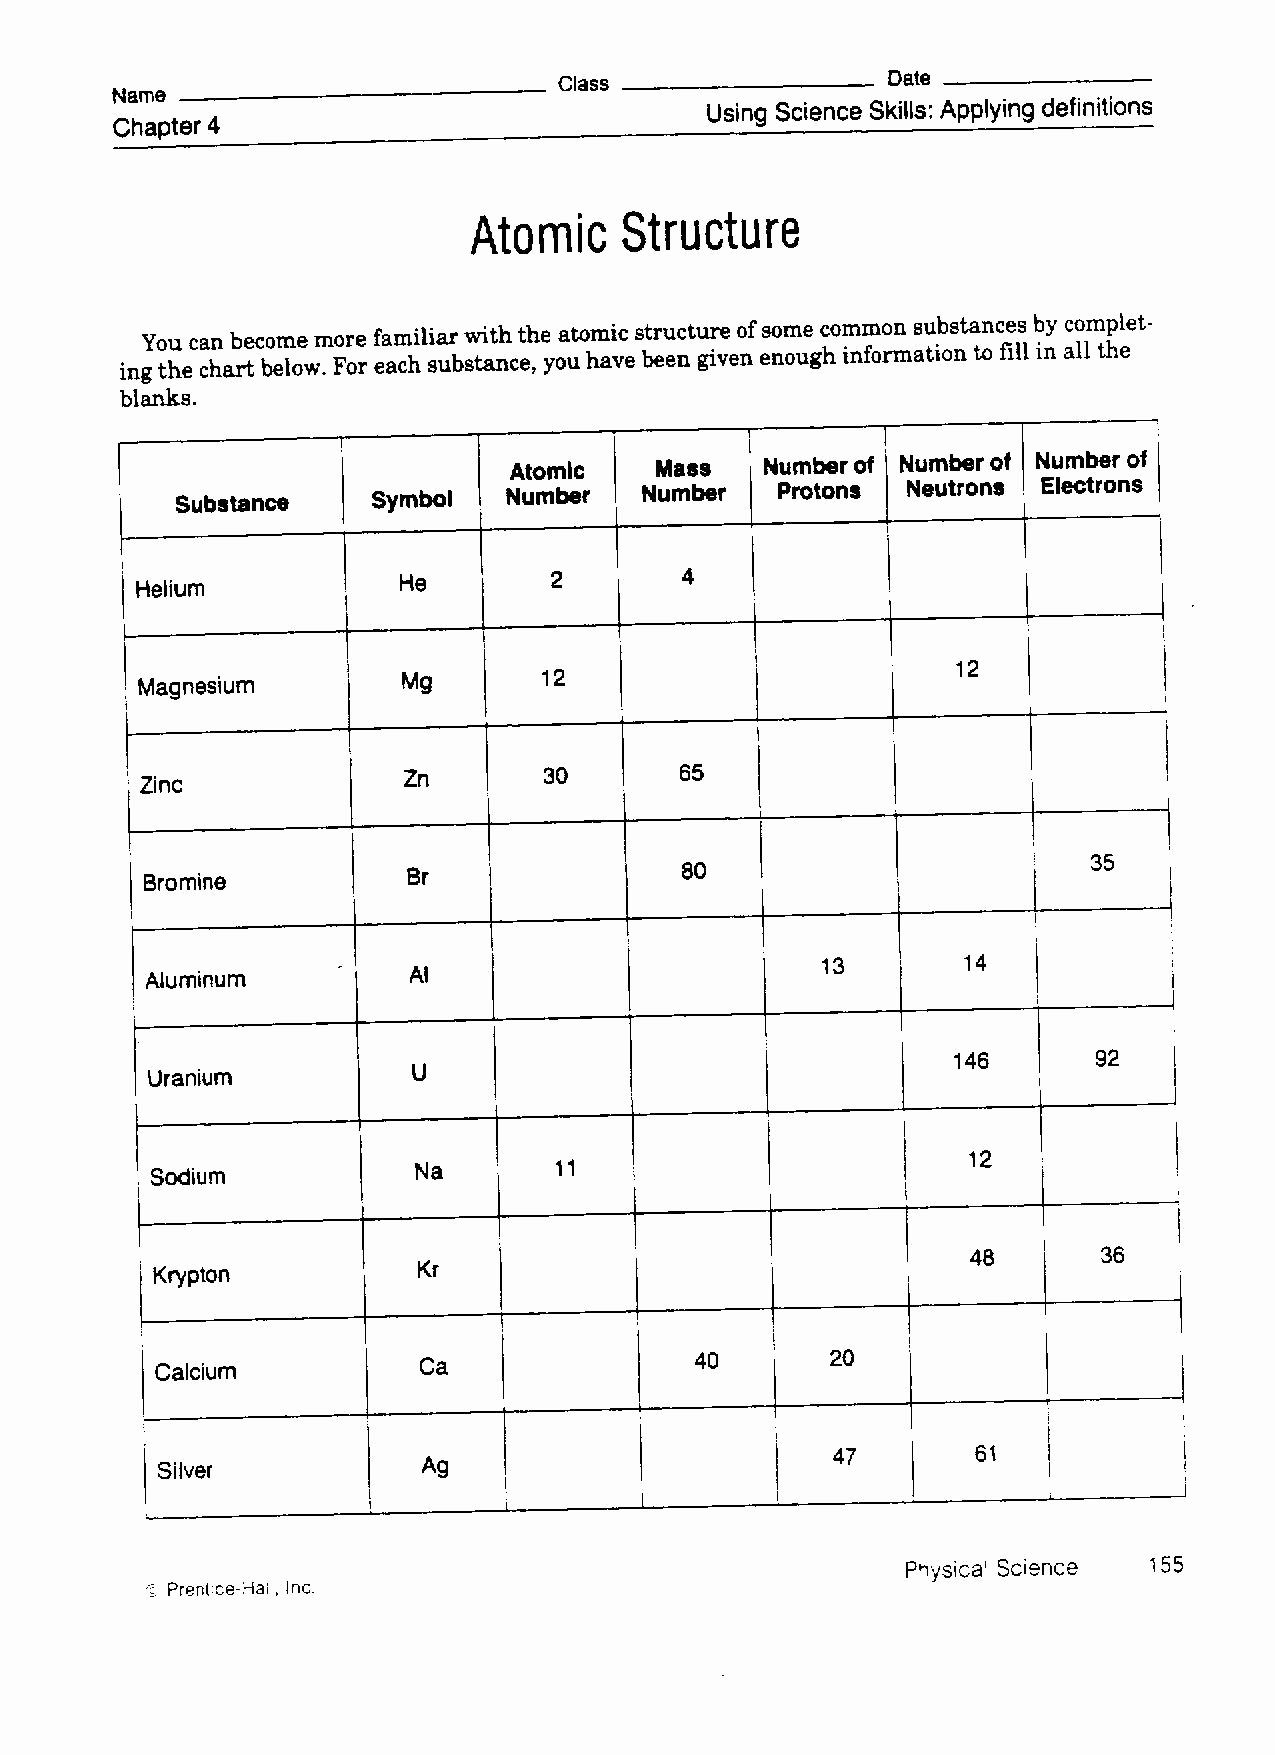 Atomic Structure Practice Worksheet Answers Beautiful 13 Best Of atomic Structure Practice Worksheet